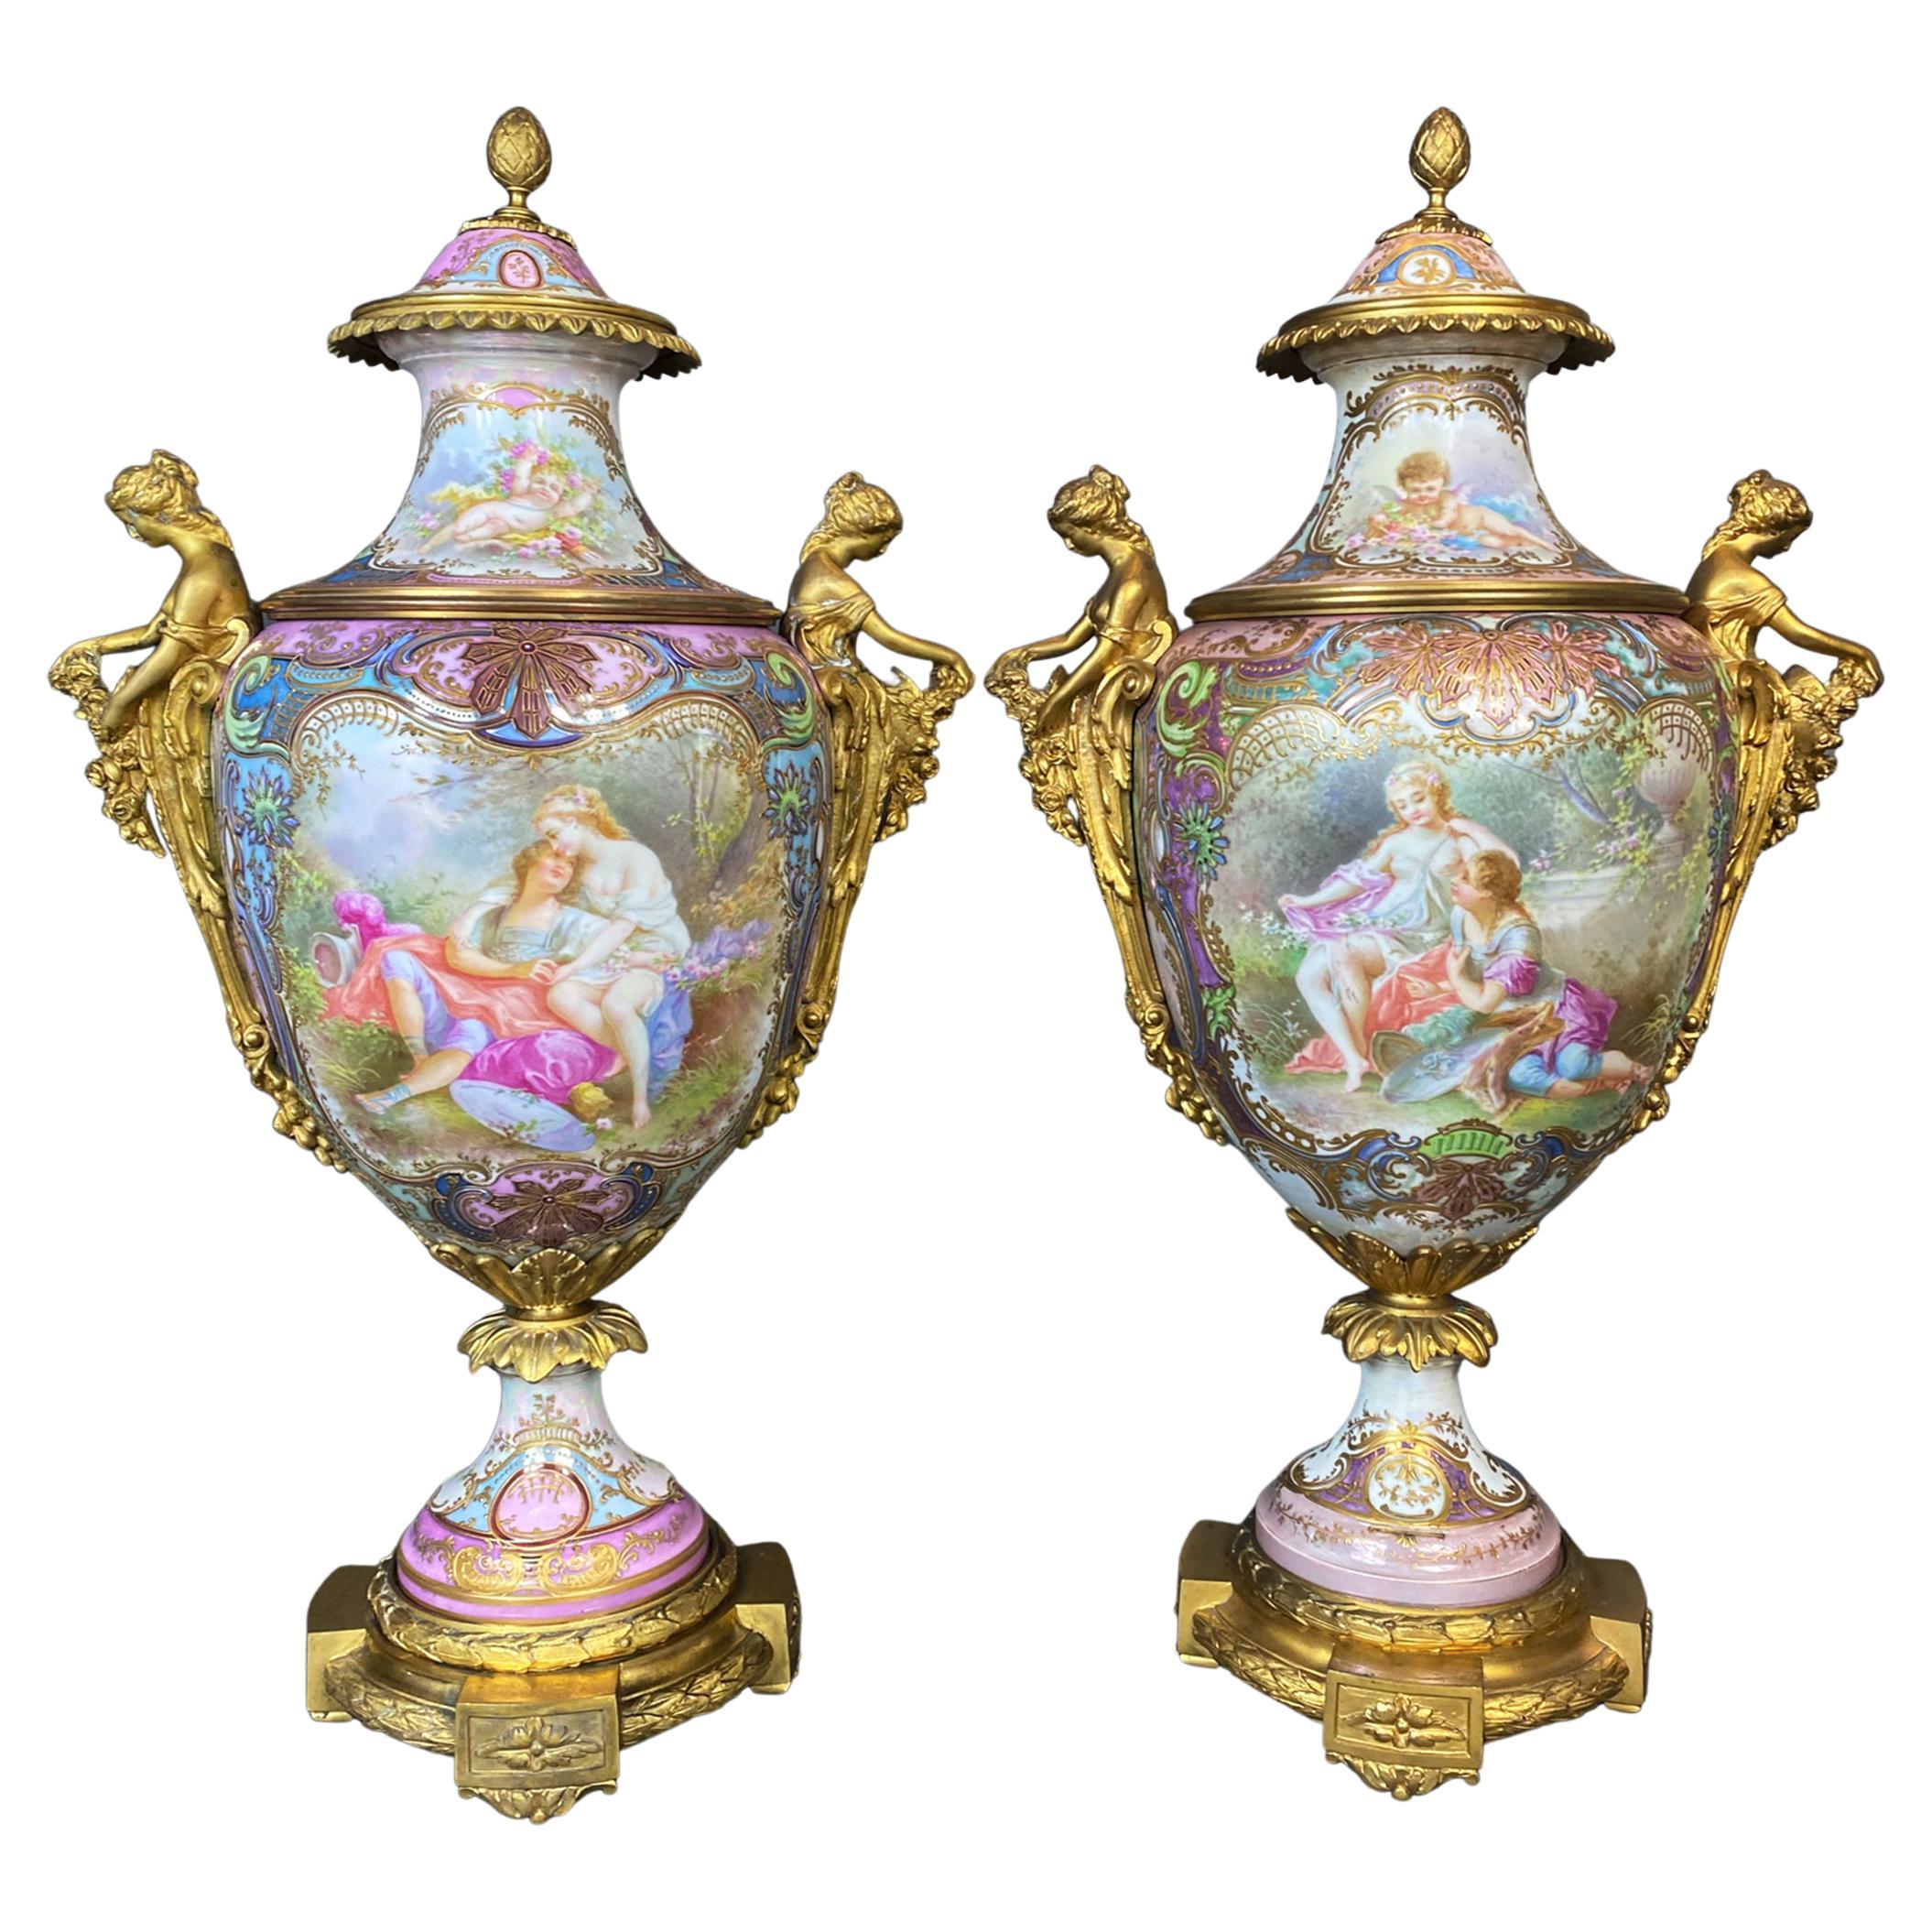 Pair of Ormolu-Mounted Sevres Style Vases with Garden Scene by A. Collot For Sale